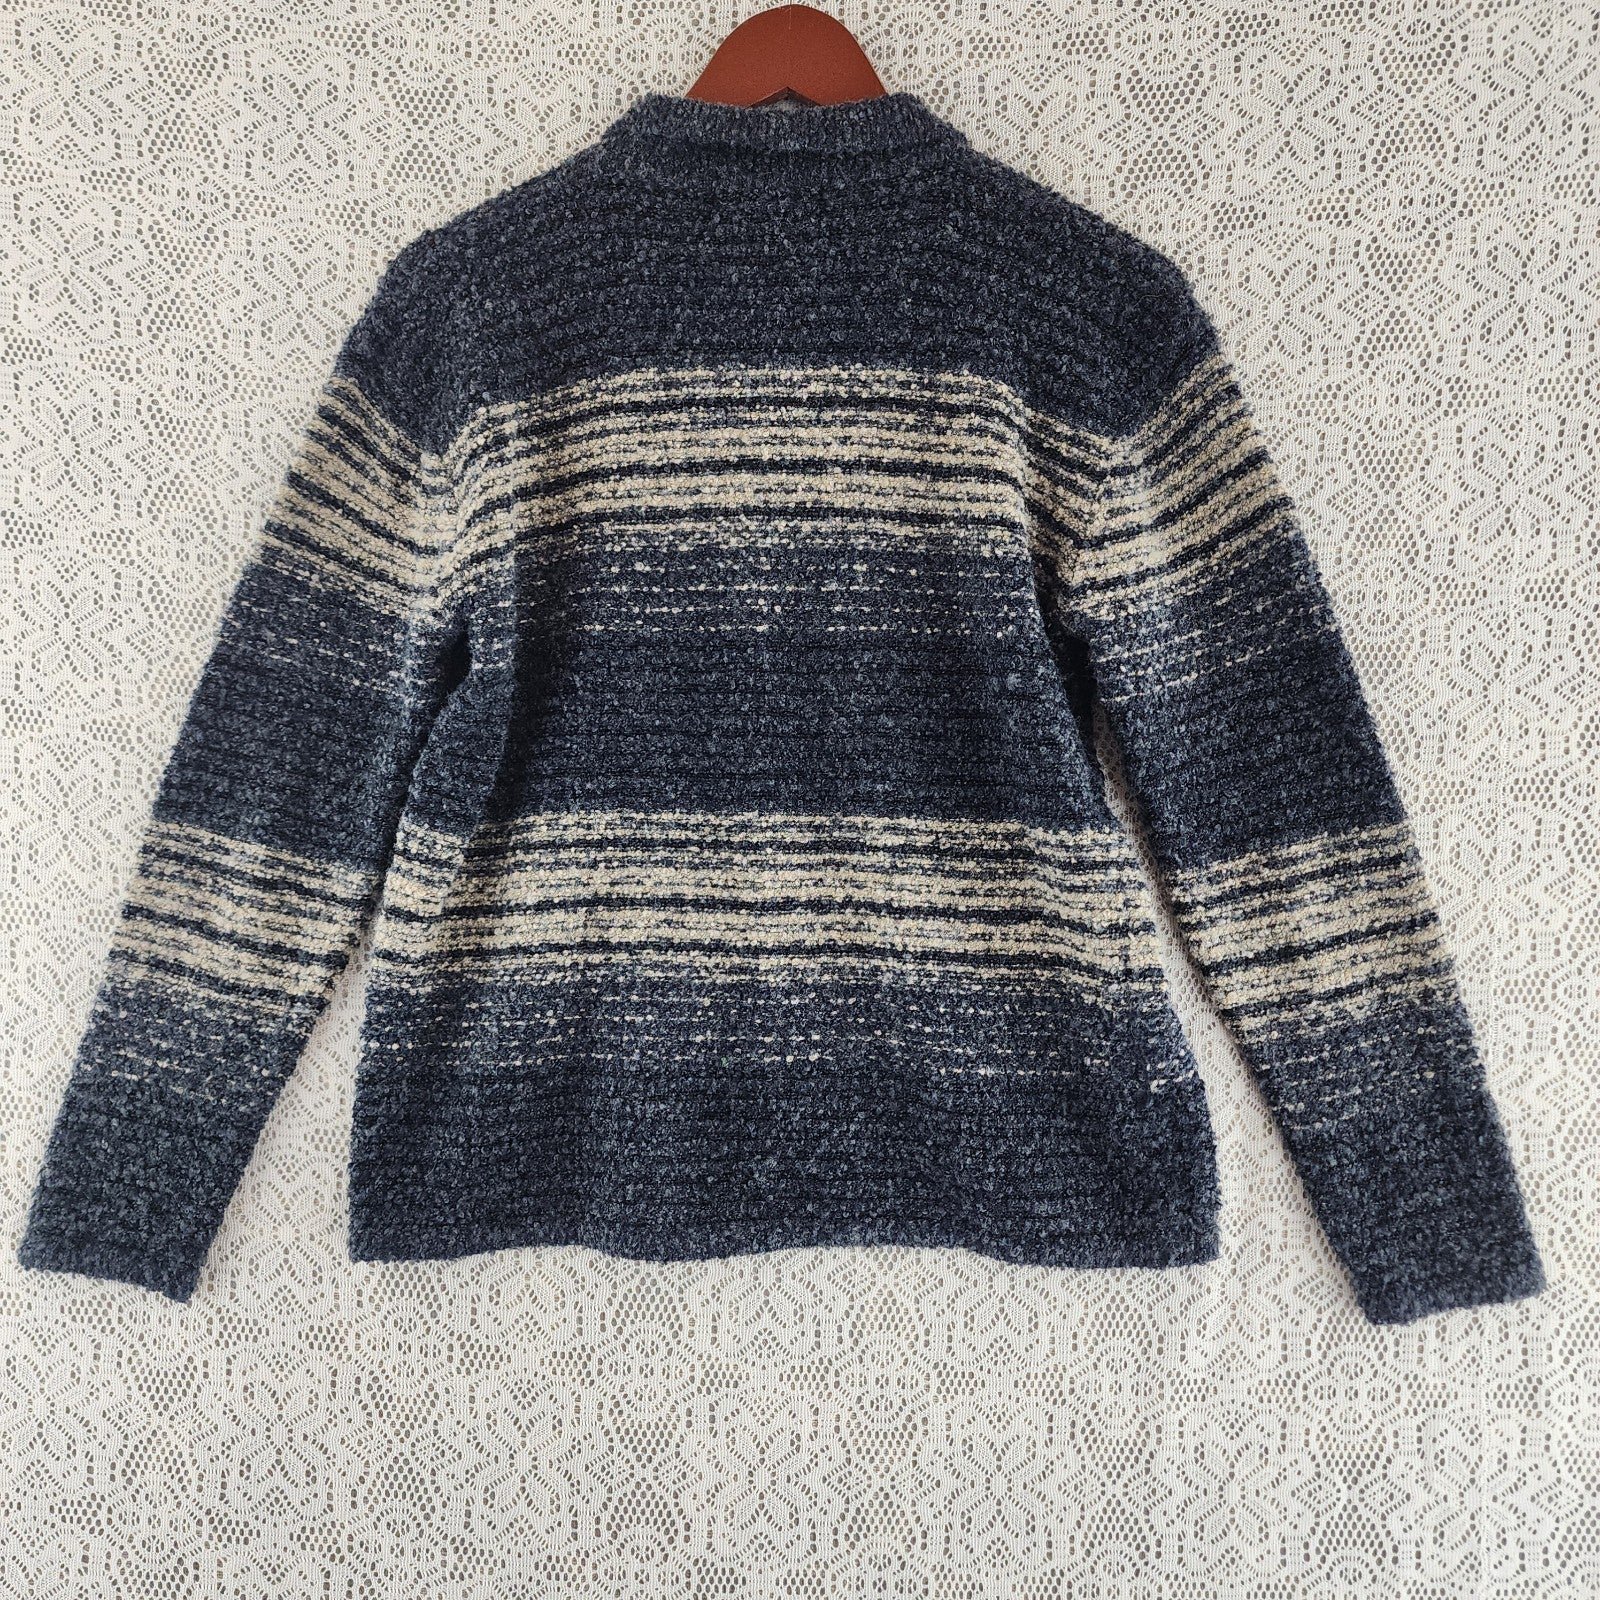 Gorgeous Vintage Spin Wool Blend Collar Pull Over Women´s Tweed Sweater M iEPpB0T3w Great